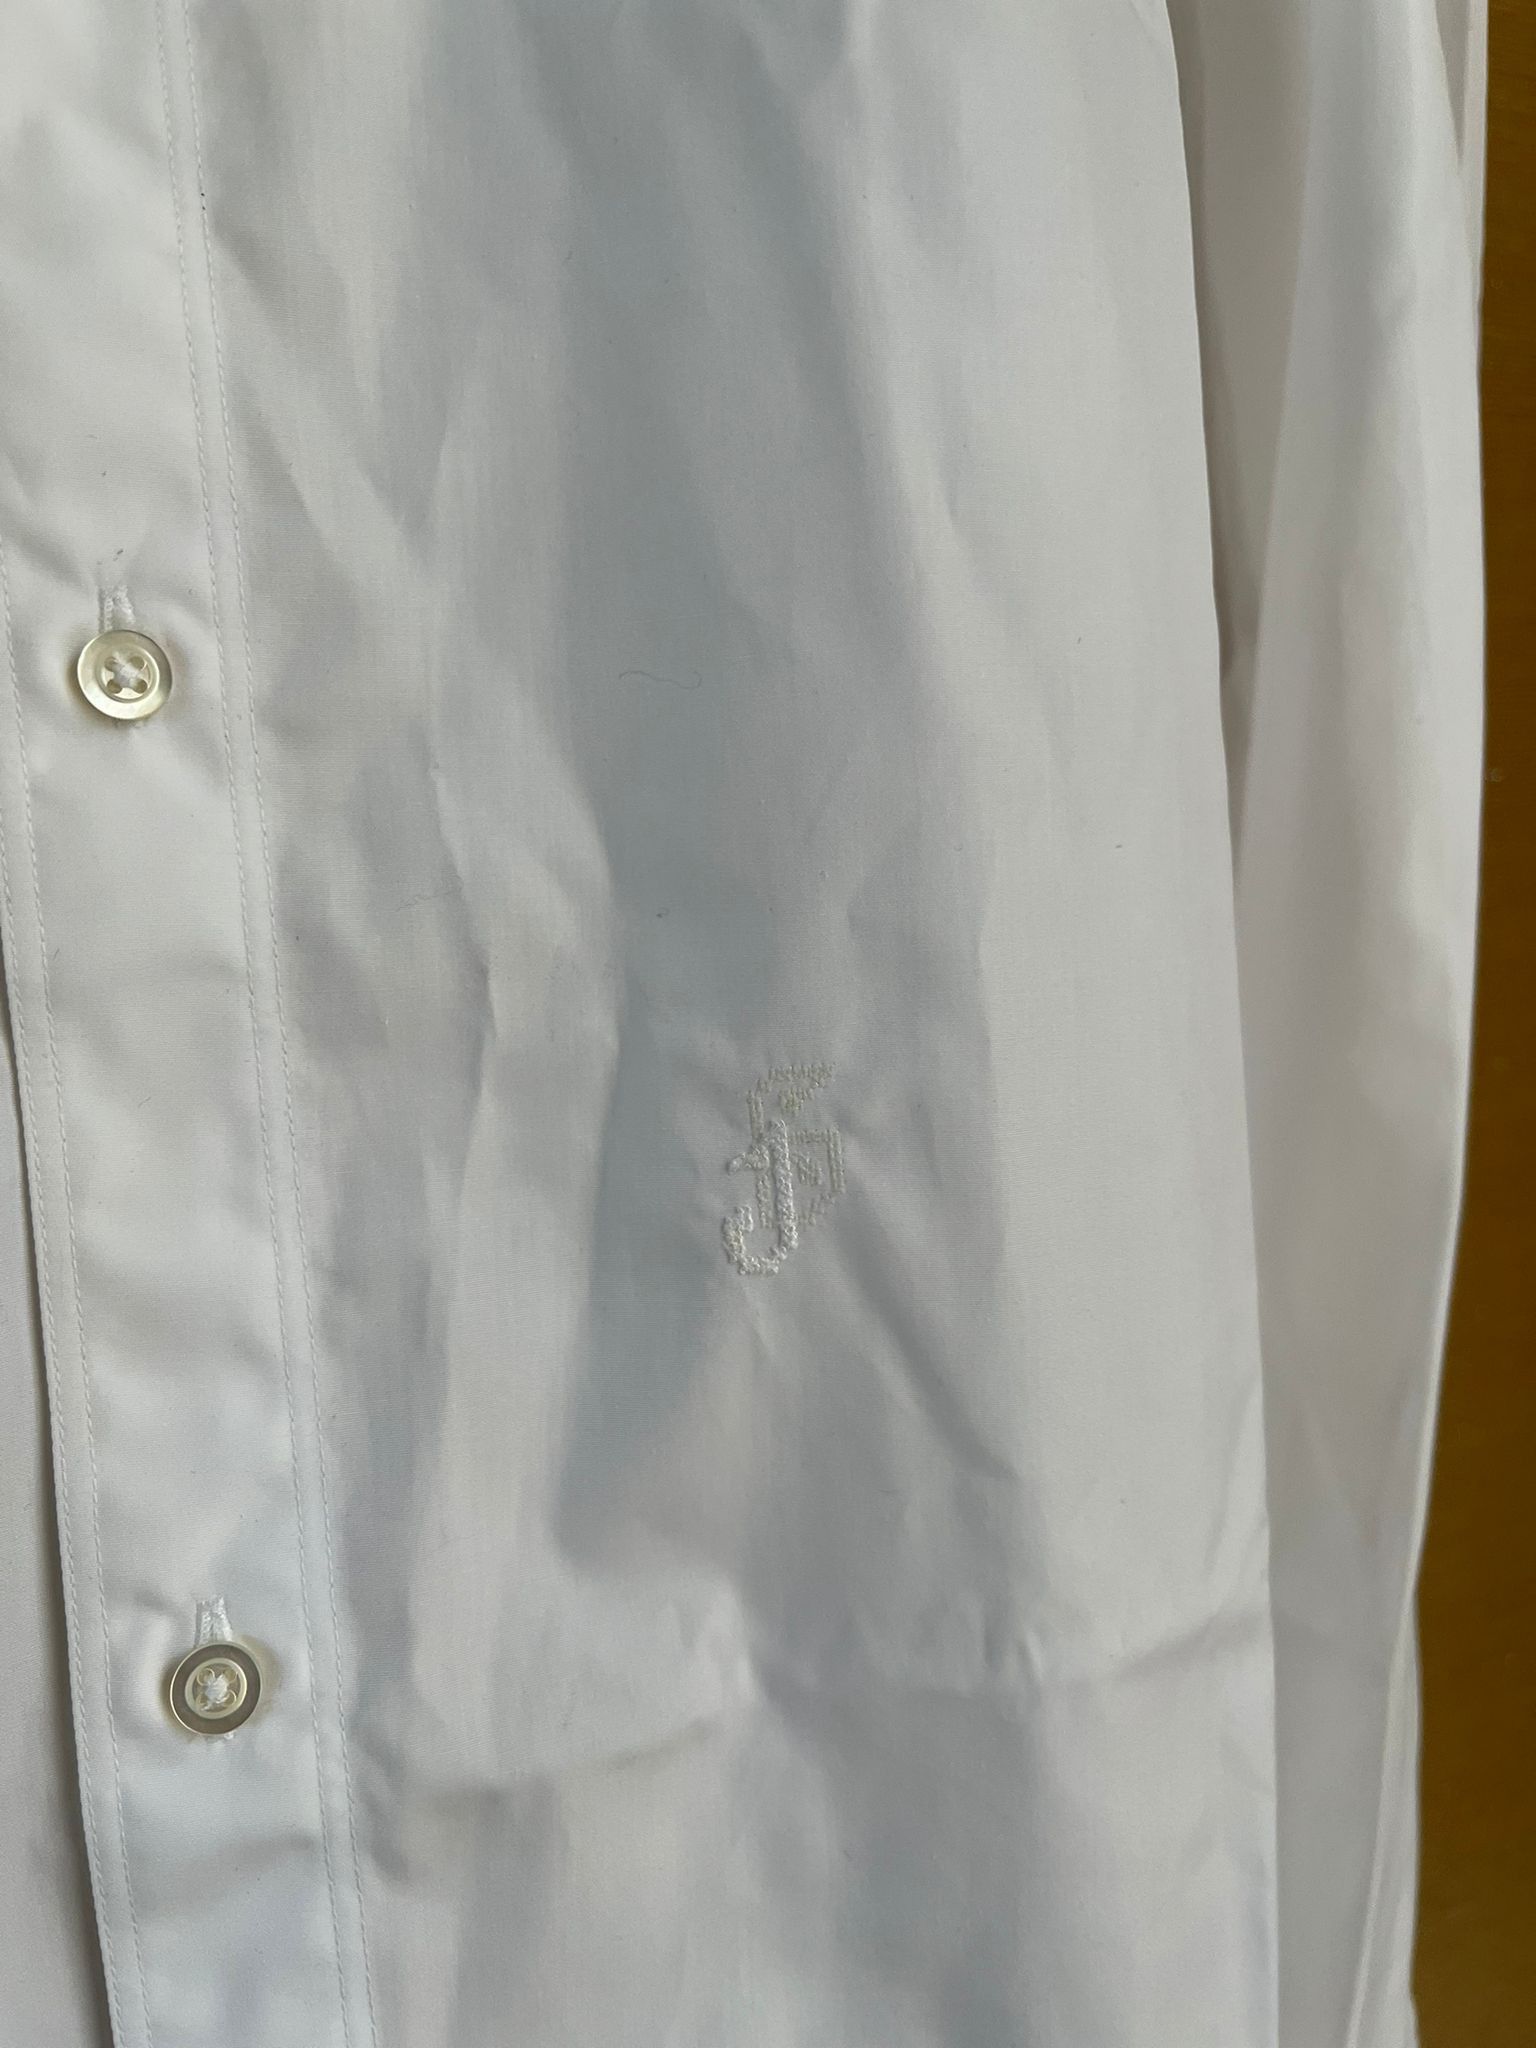 Jil Sander Embroidered Thursday Button Up in White Size US M / EU 48-50 / 2 - 9 Thumbnail